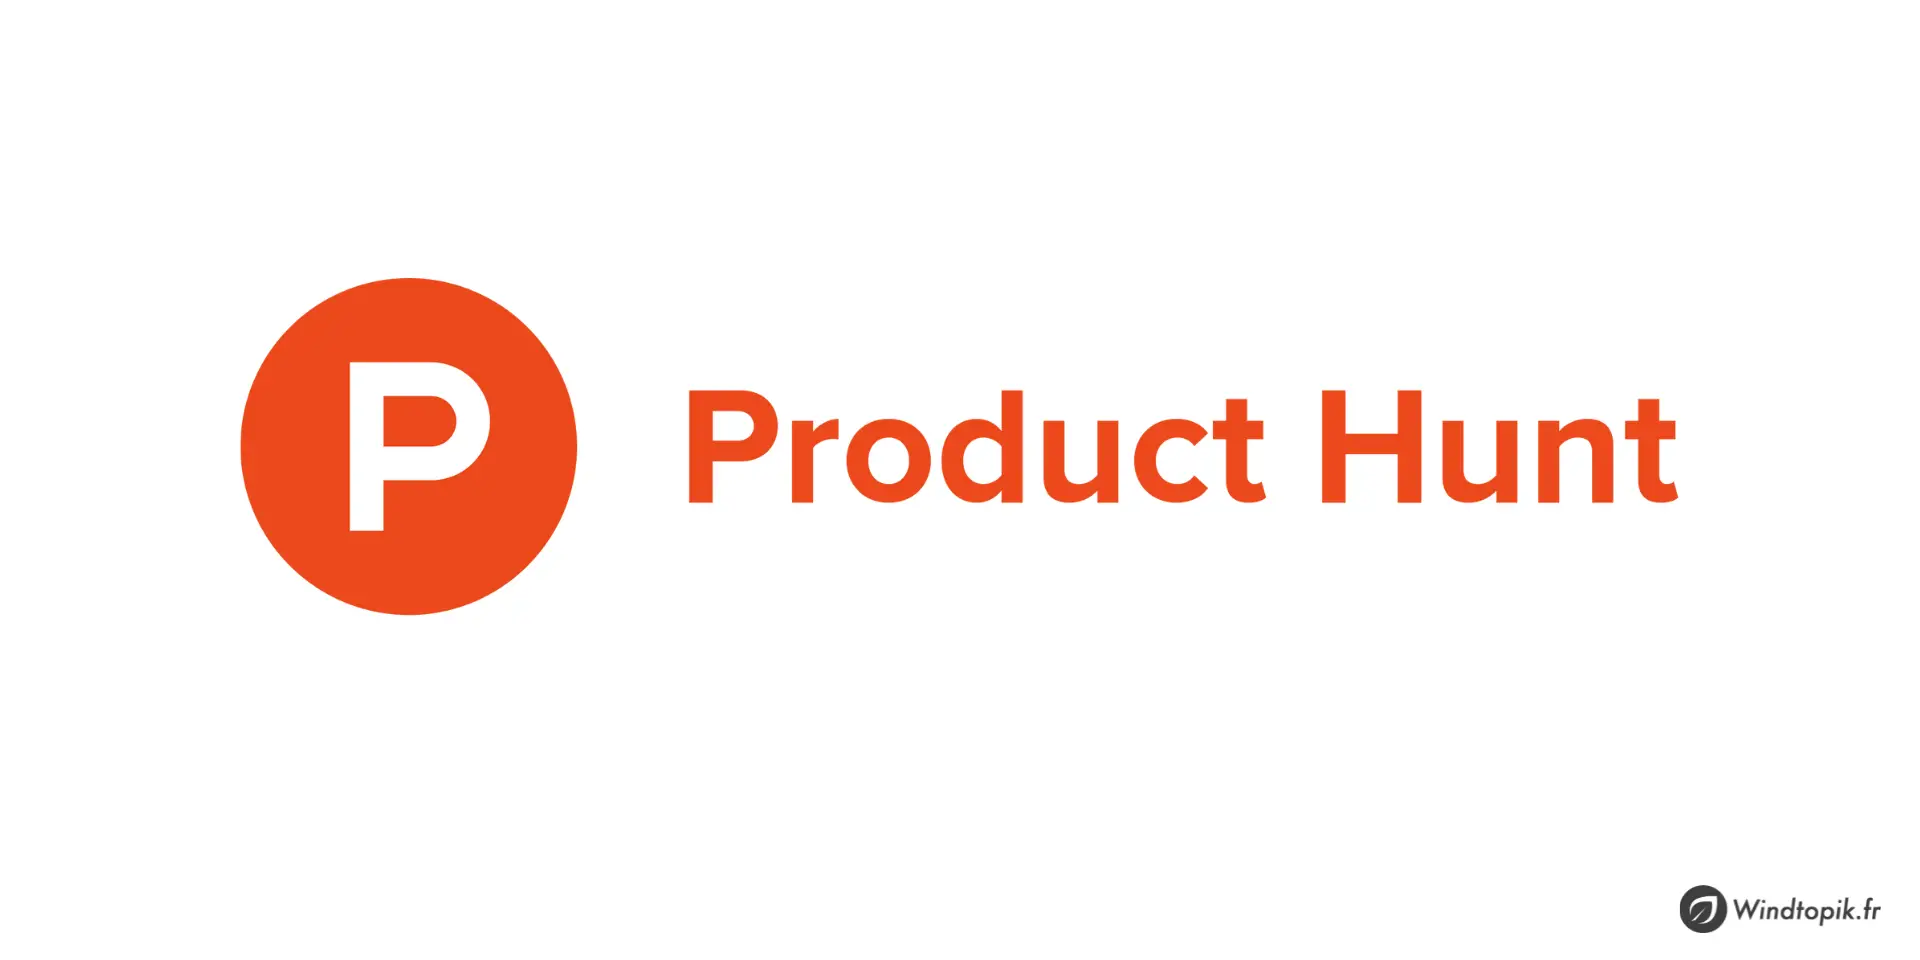 Les meilleures découvertes de produits sur ProductHunt Product Hunt is a website and online community for discovering the best new products, every day. It showcases the latest products from startups, software, hardware, and more. Users can share their reviews and experiences with these products to help others in their decision-making process.